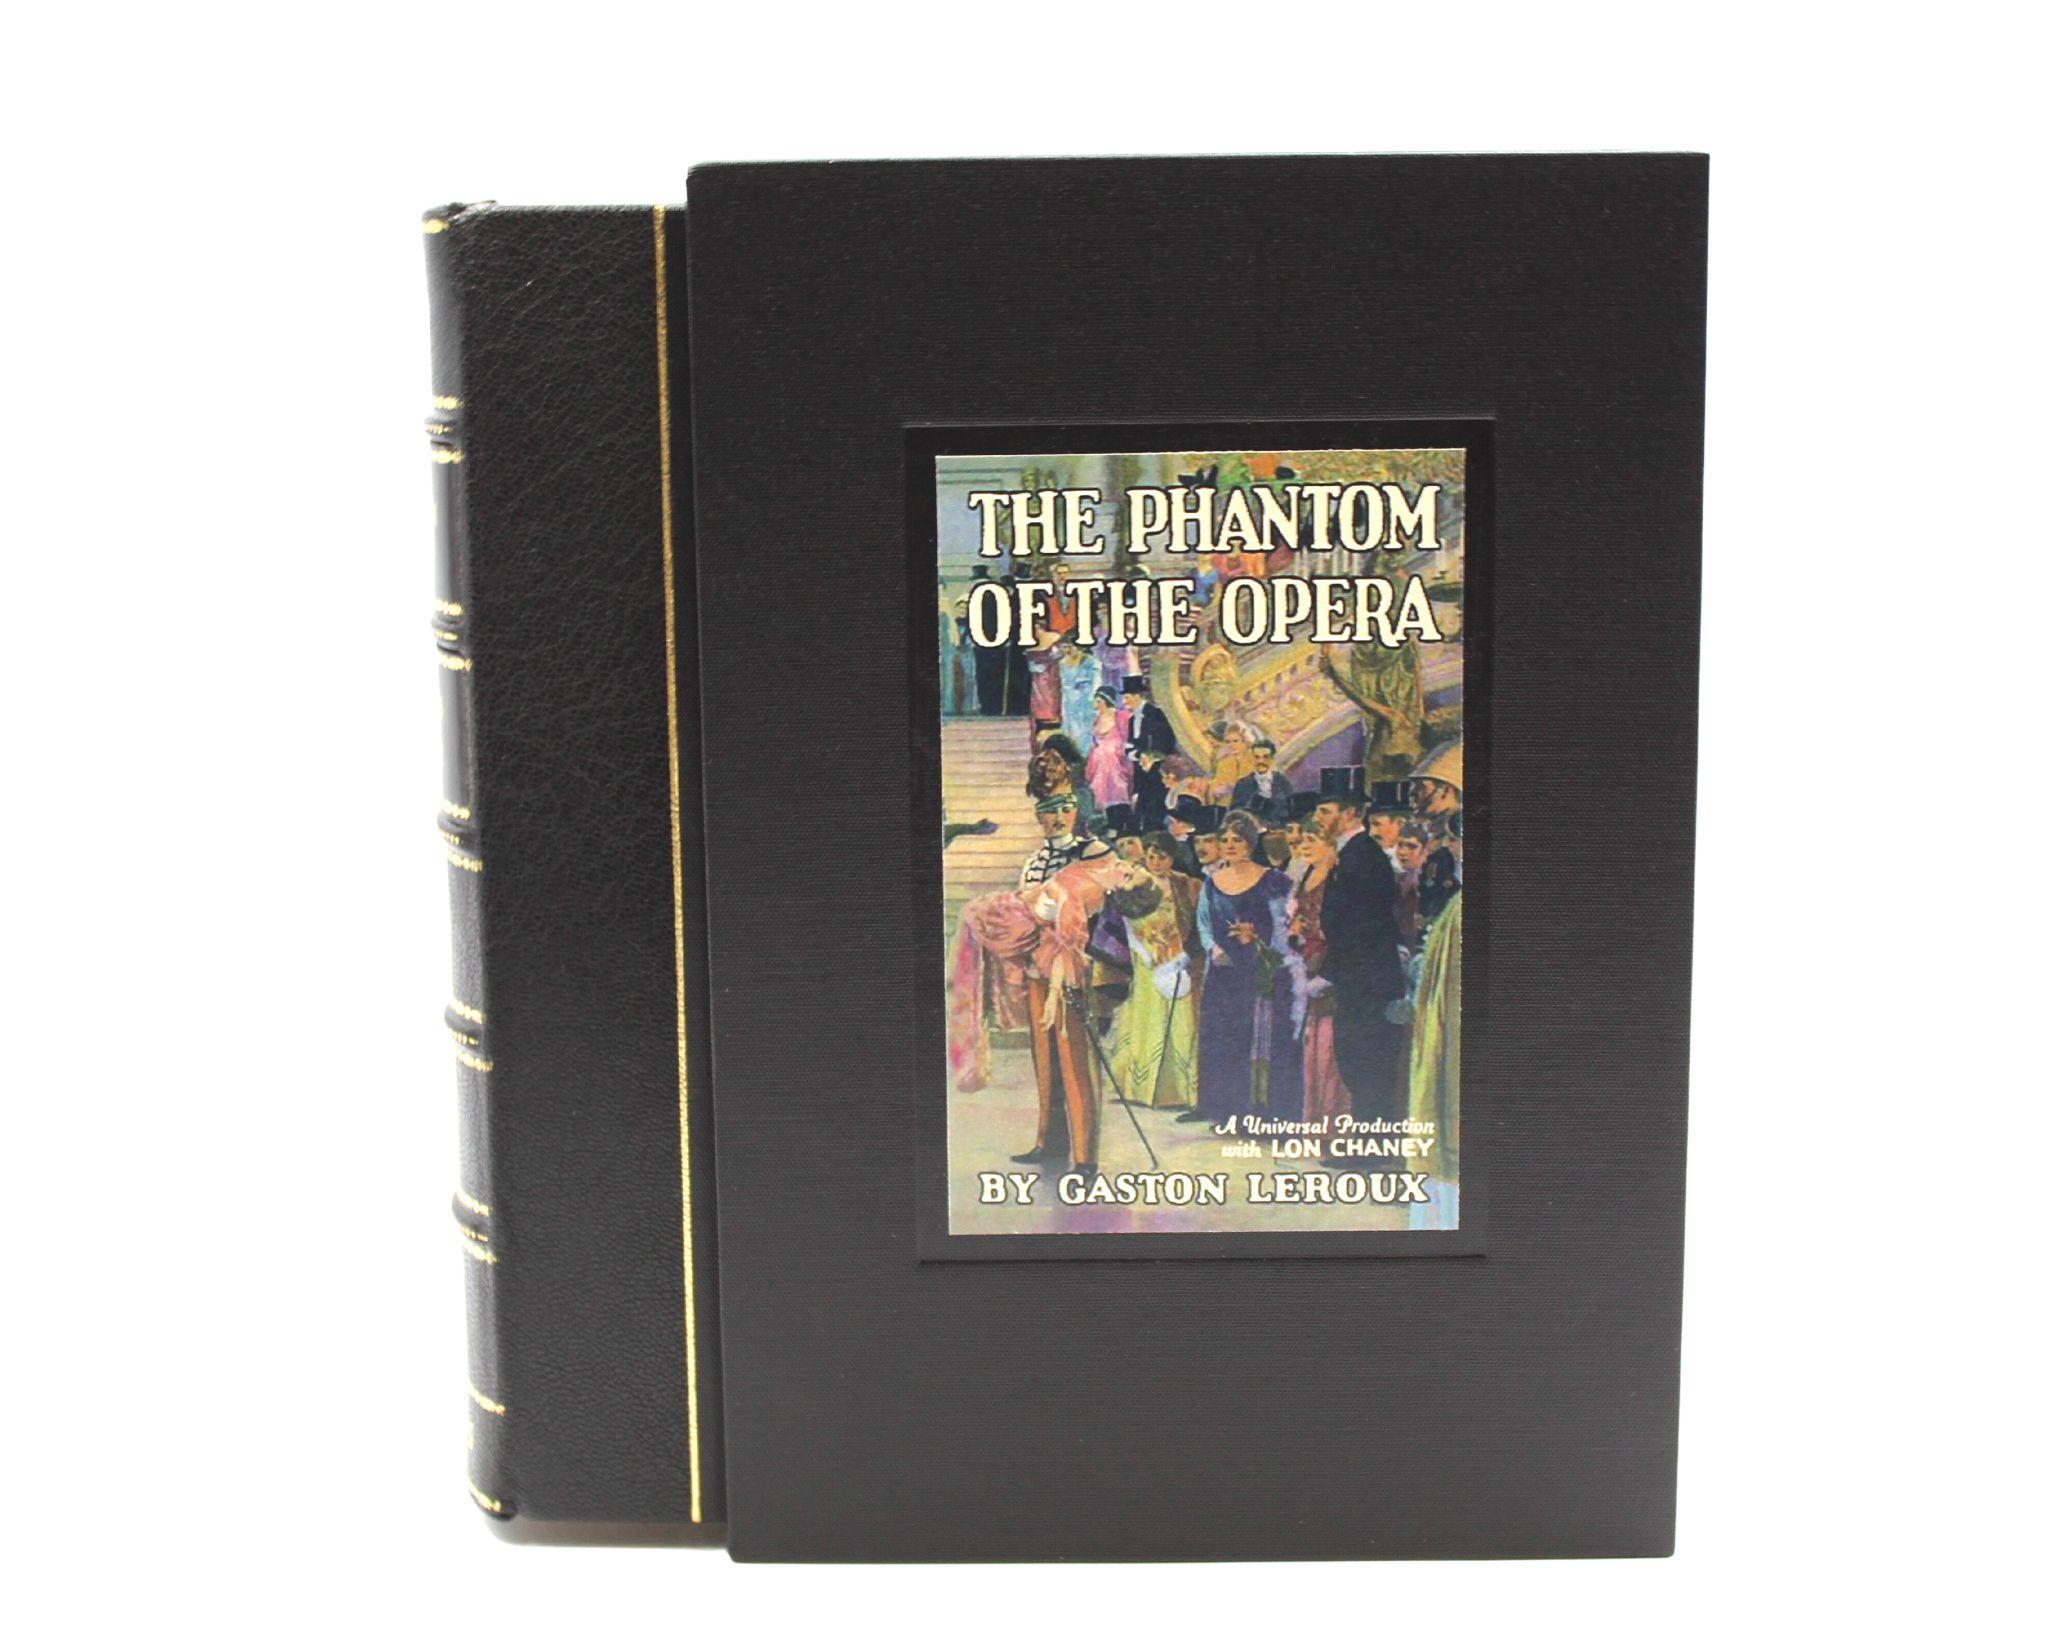 Gilt The Phantom of the Opera by Gaston Leroux, Signed by Carla Laemmle, Photoplay For Sale